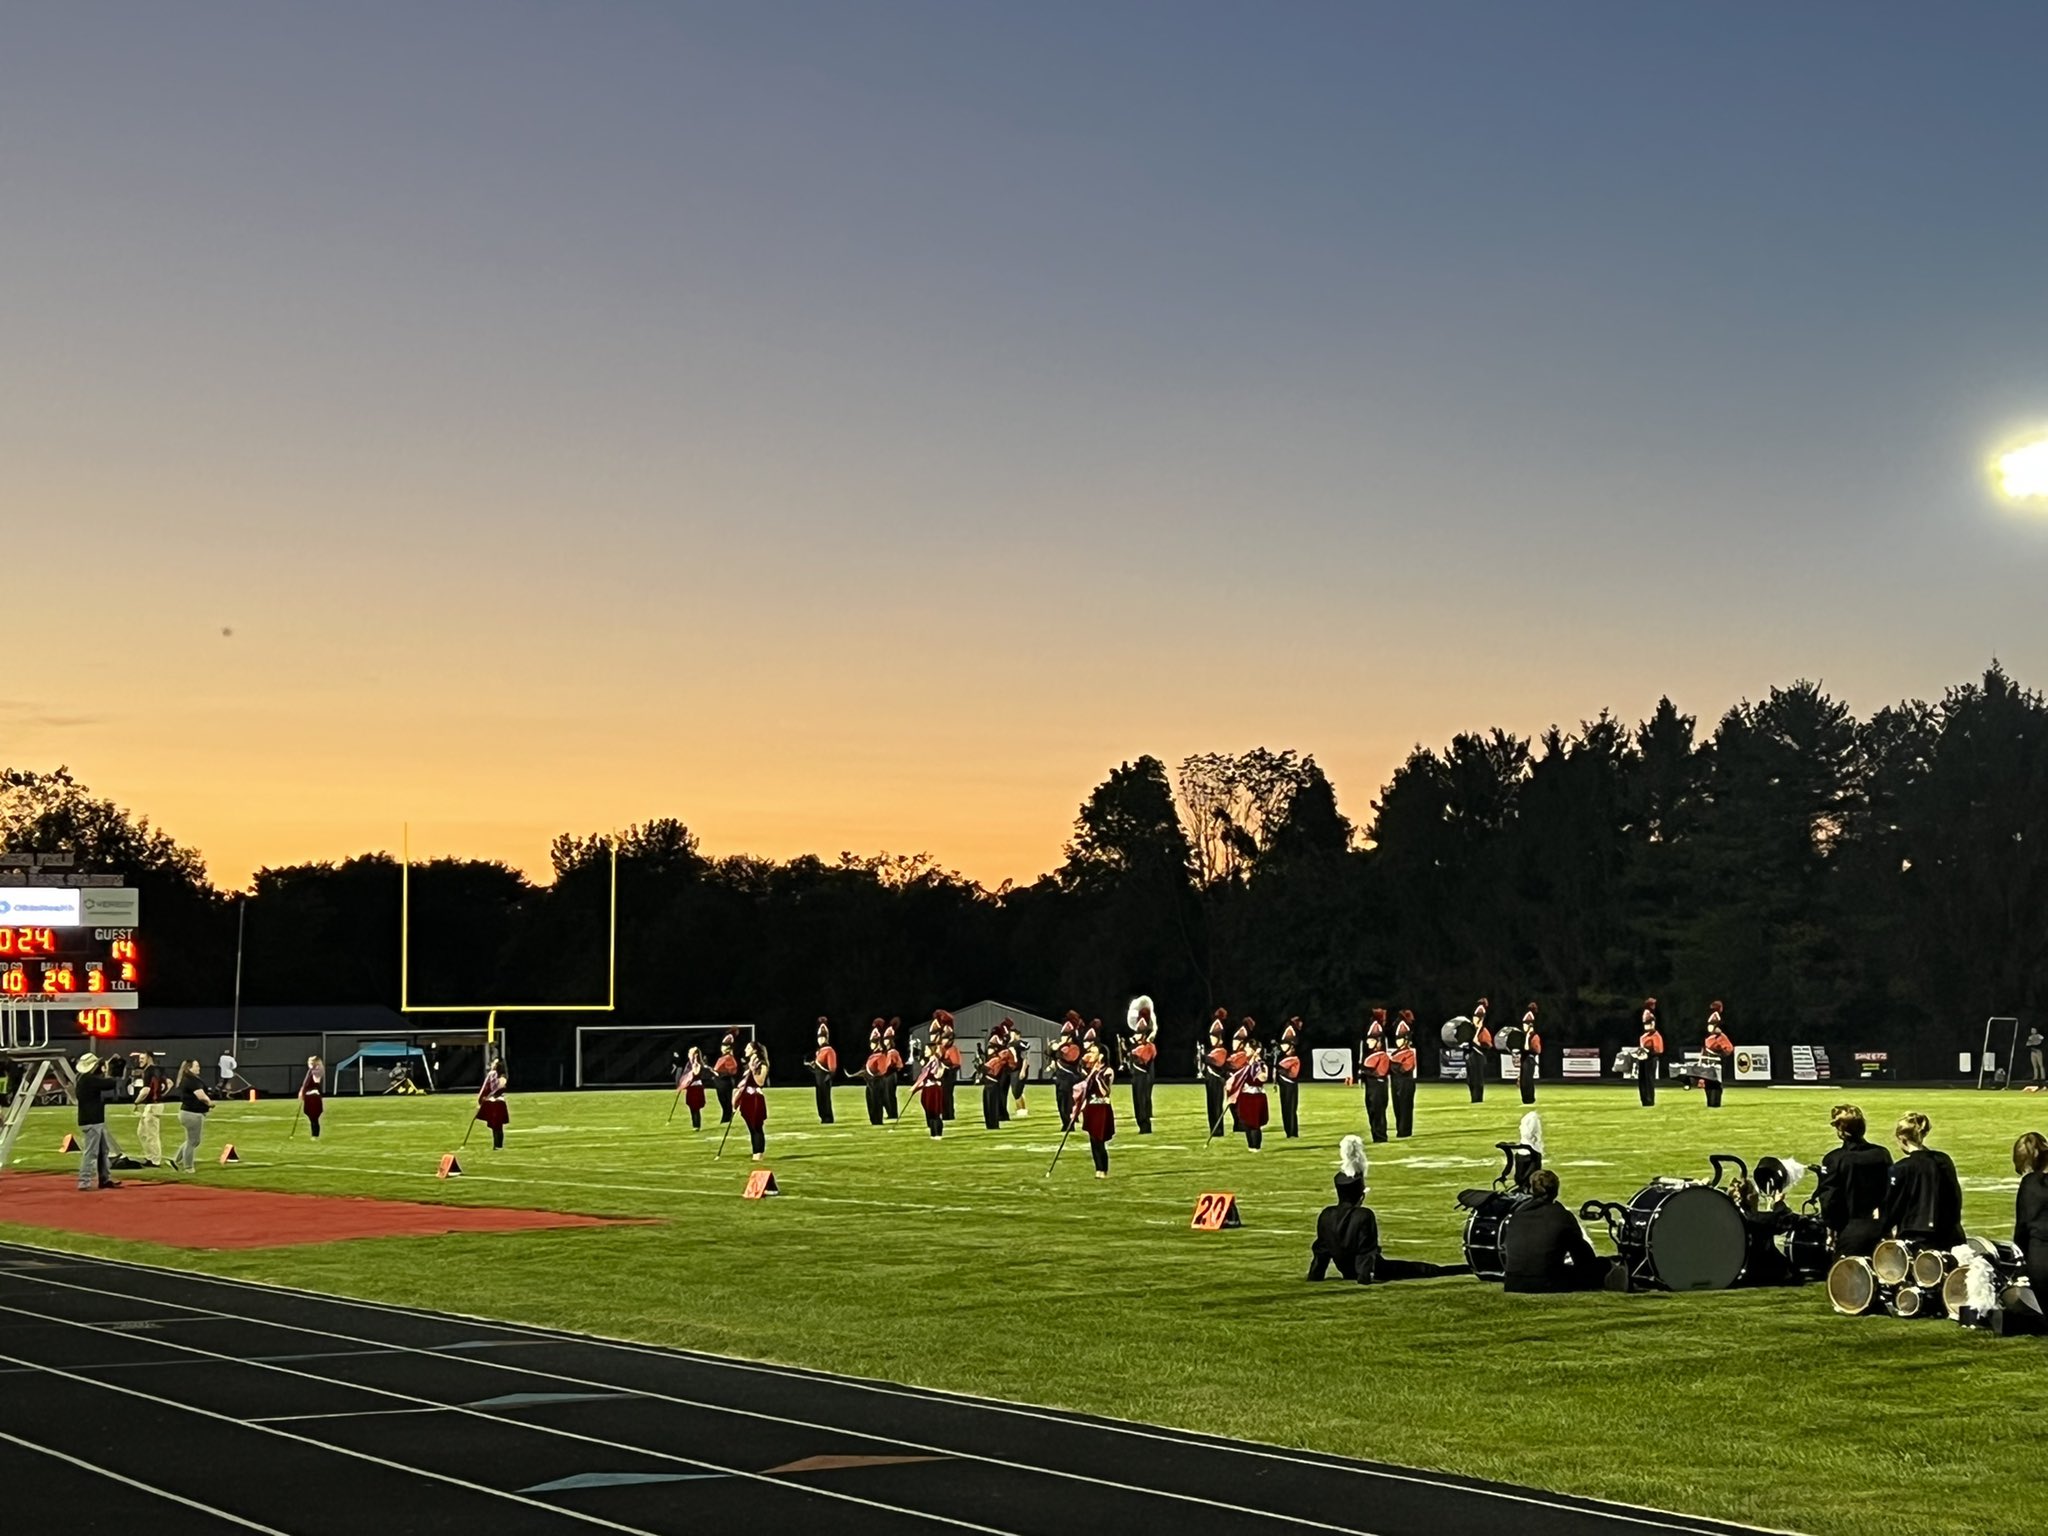 circleville-city-schools-on-twitter-it-s-a-beautiful-night-and-the-tiger-band-just-took-the